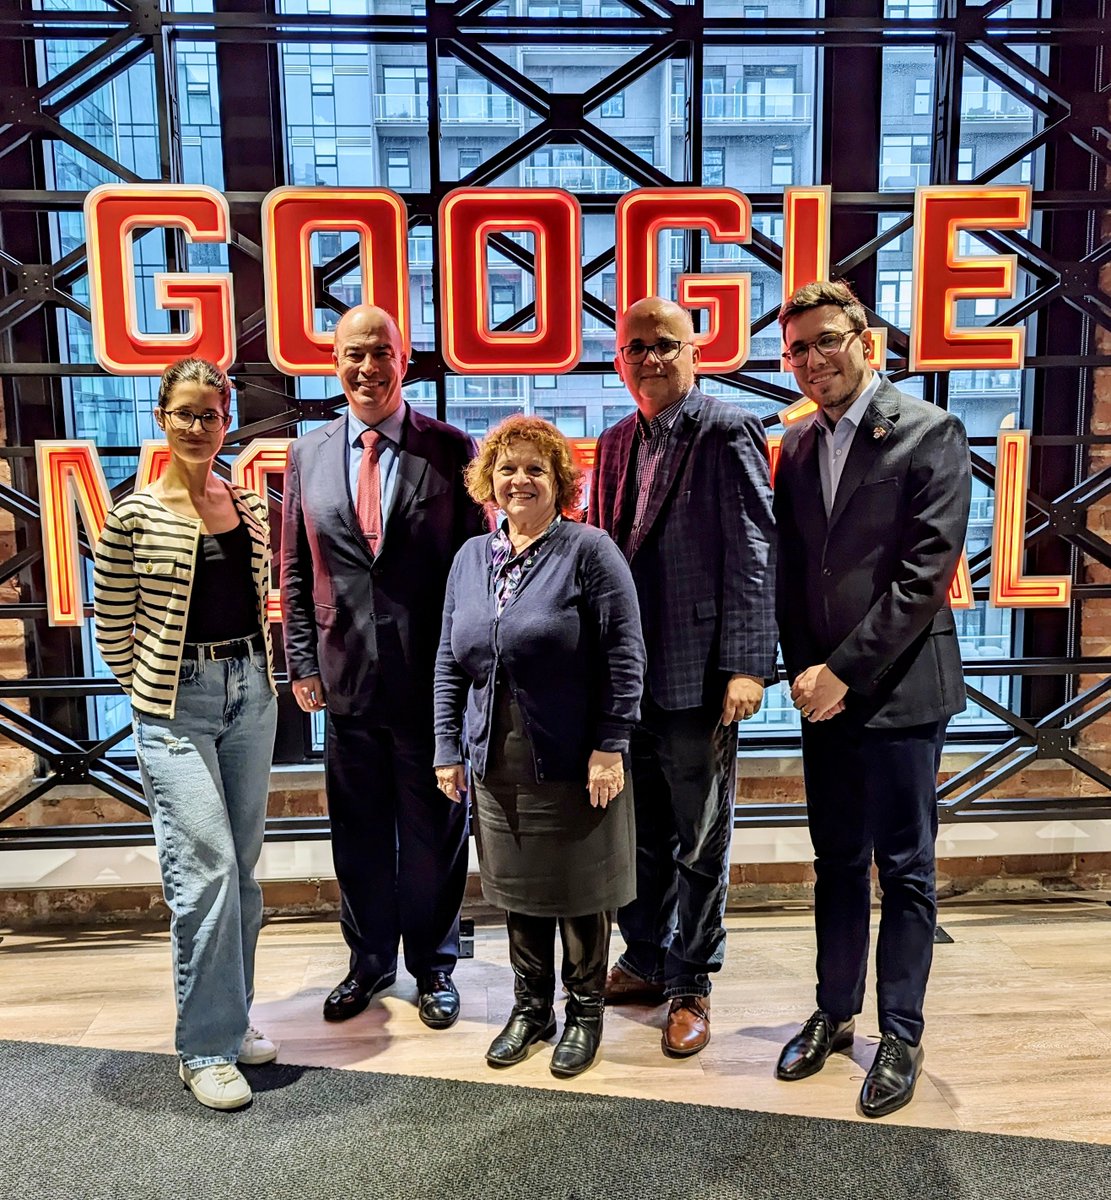 Members of our team and @AmChamQC visited the Montreal office of @Google earlier this week. Google's impressive footprint here is a testament to Montreal's dynamic and innovative tech sector!